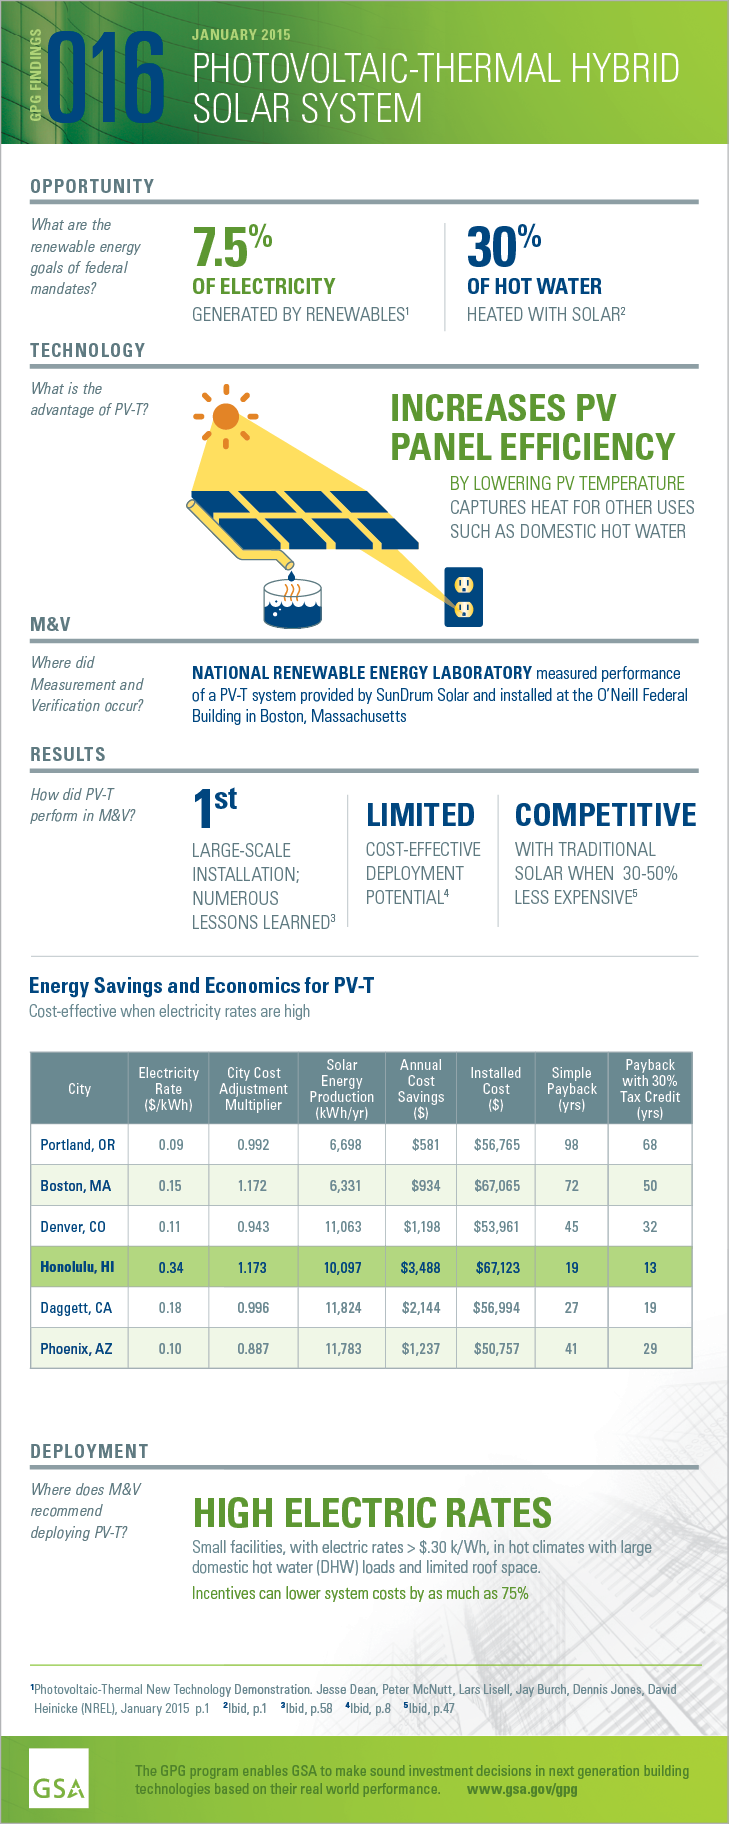 Download the PDF version of the full-sized infographic for GPG016 PV Thermal Hybrid Solar.